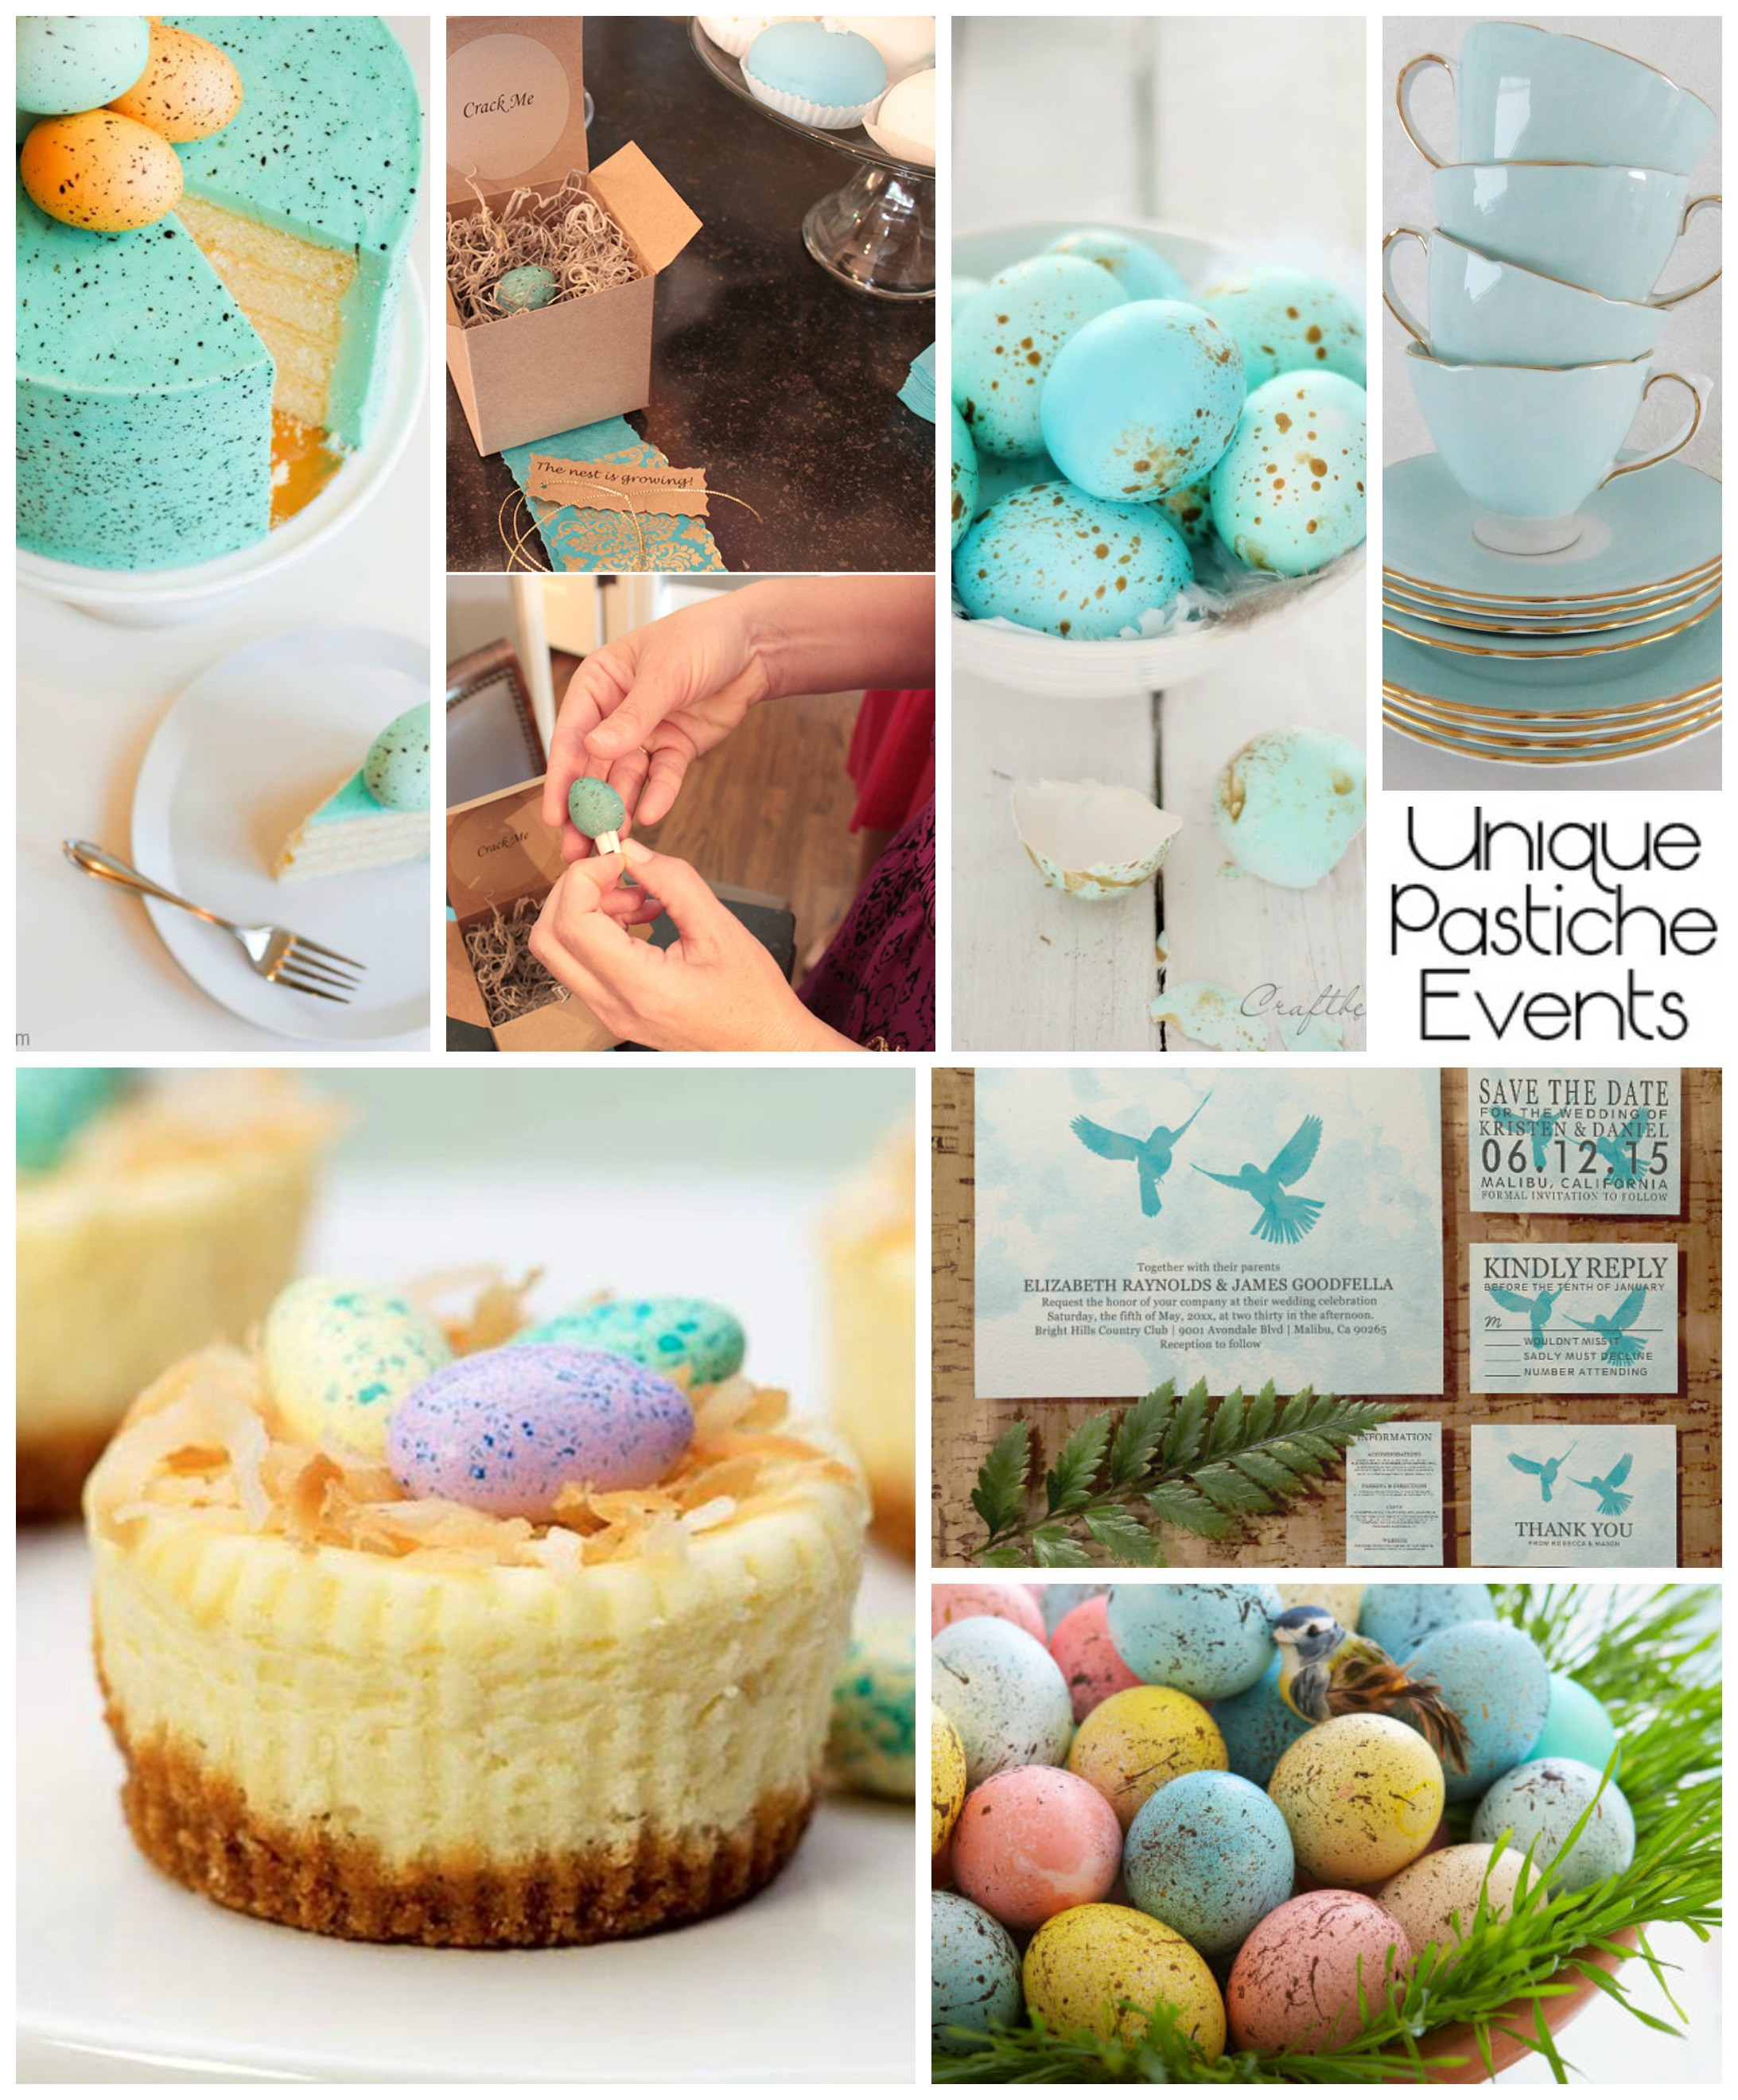 Engagement Party Ideas For Spring
 Speckled Blue Egg – Spring Engagement Party Ideas